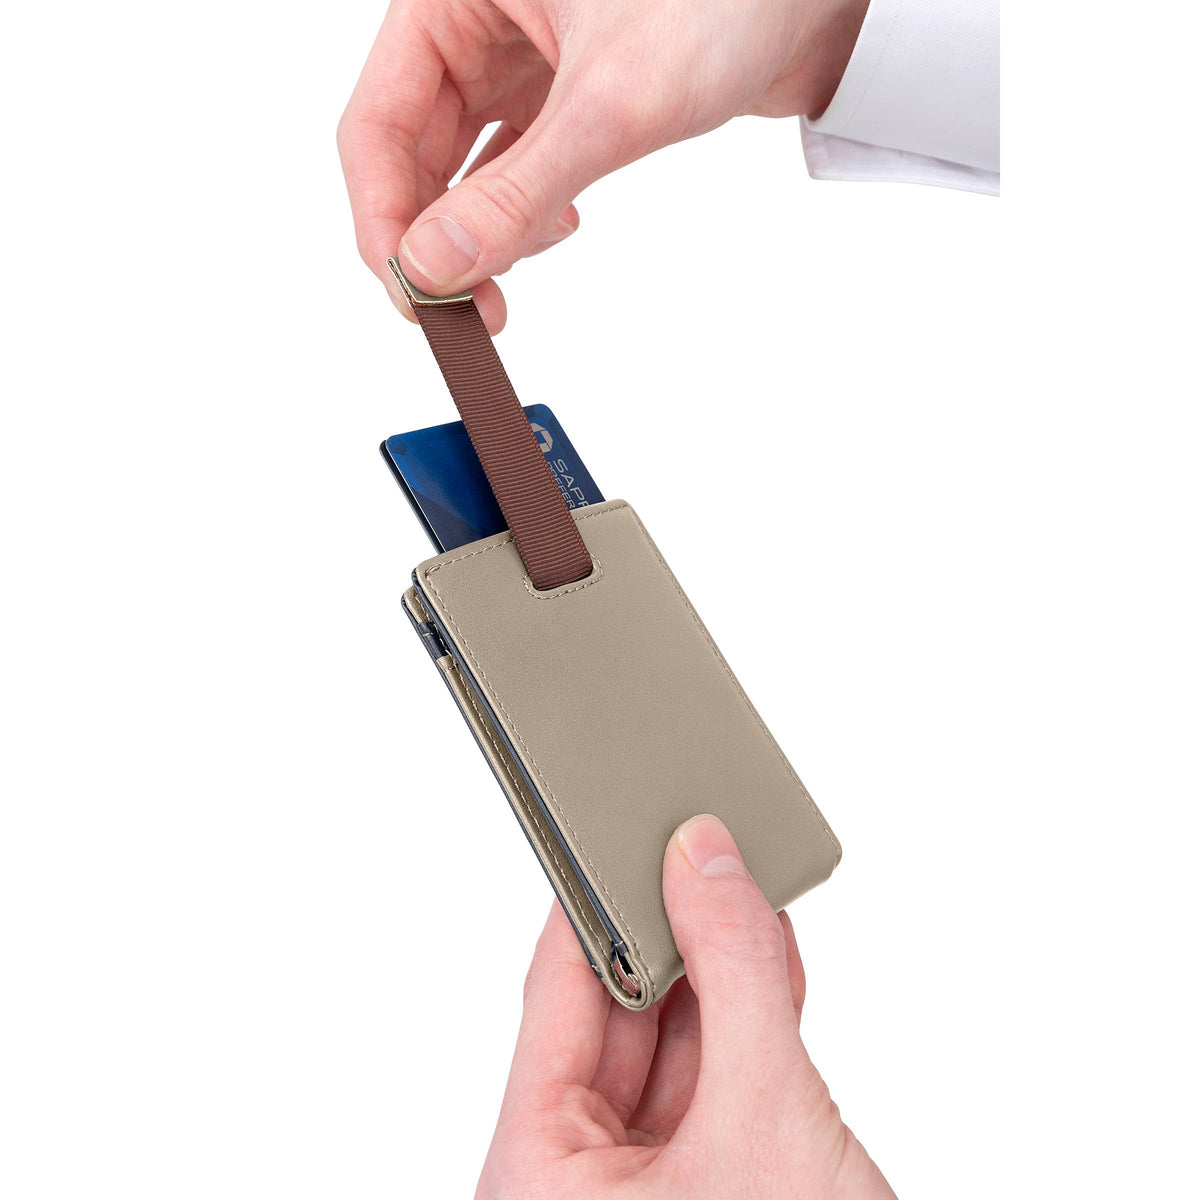 Mio Marino - Men's Slim Bifold Wallet with Quick Access Pull Tab: Gray/Beige - WALLET - Synik Clothing - synikclothing.com